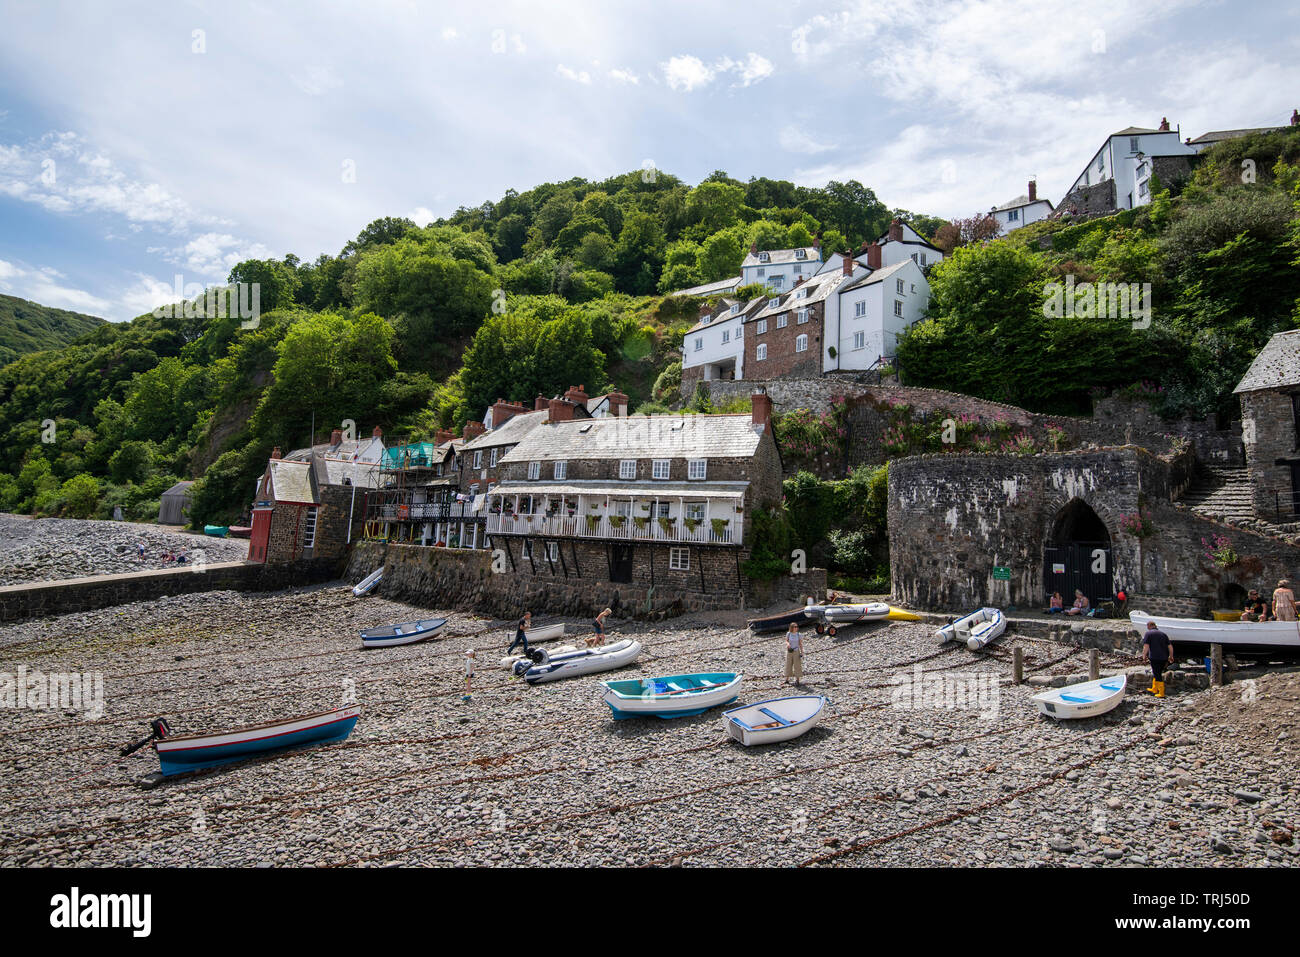 The beach and Harbour at Clovelly, Devon England UK Stock Photo